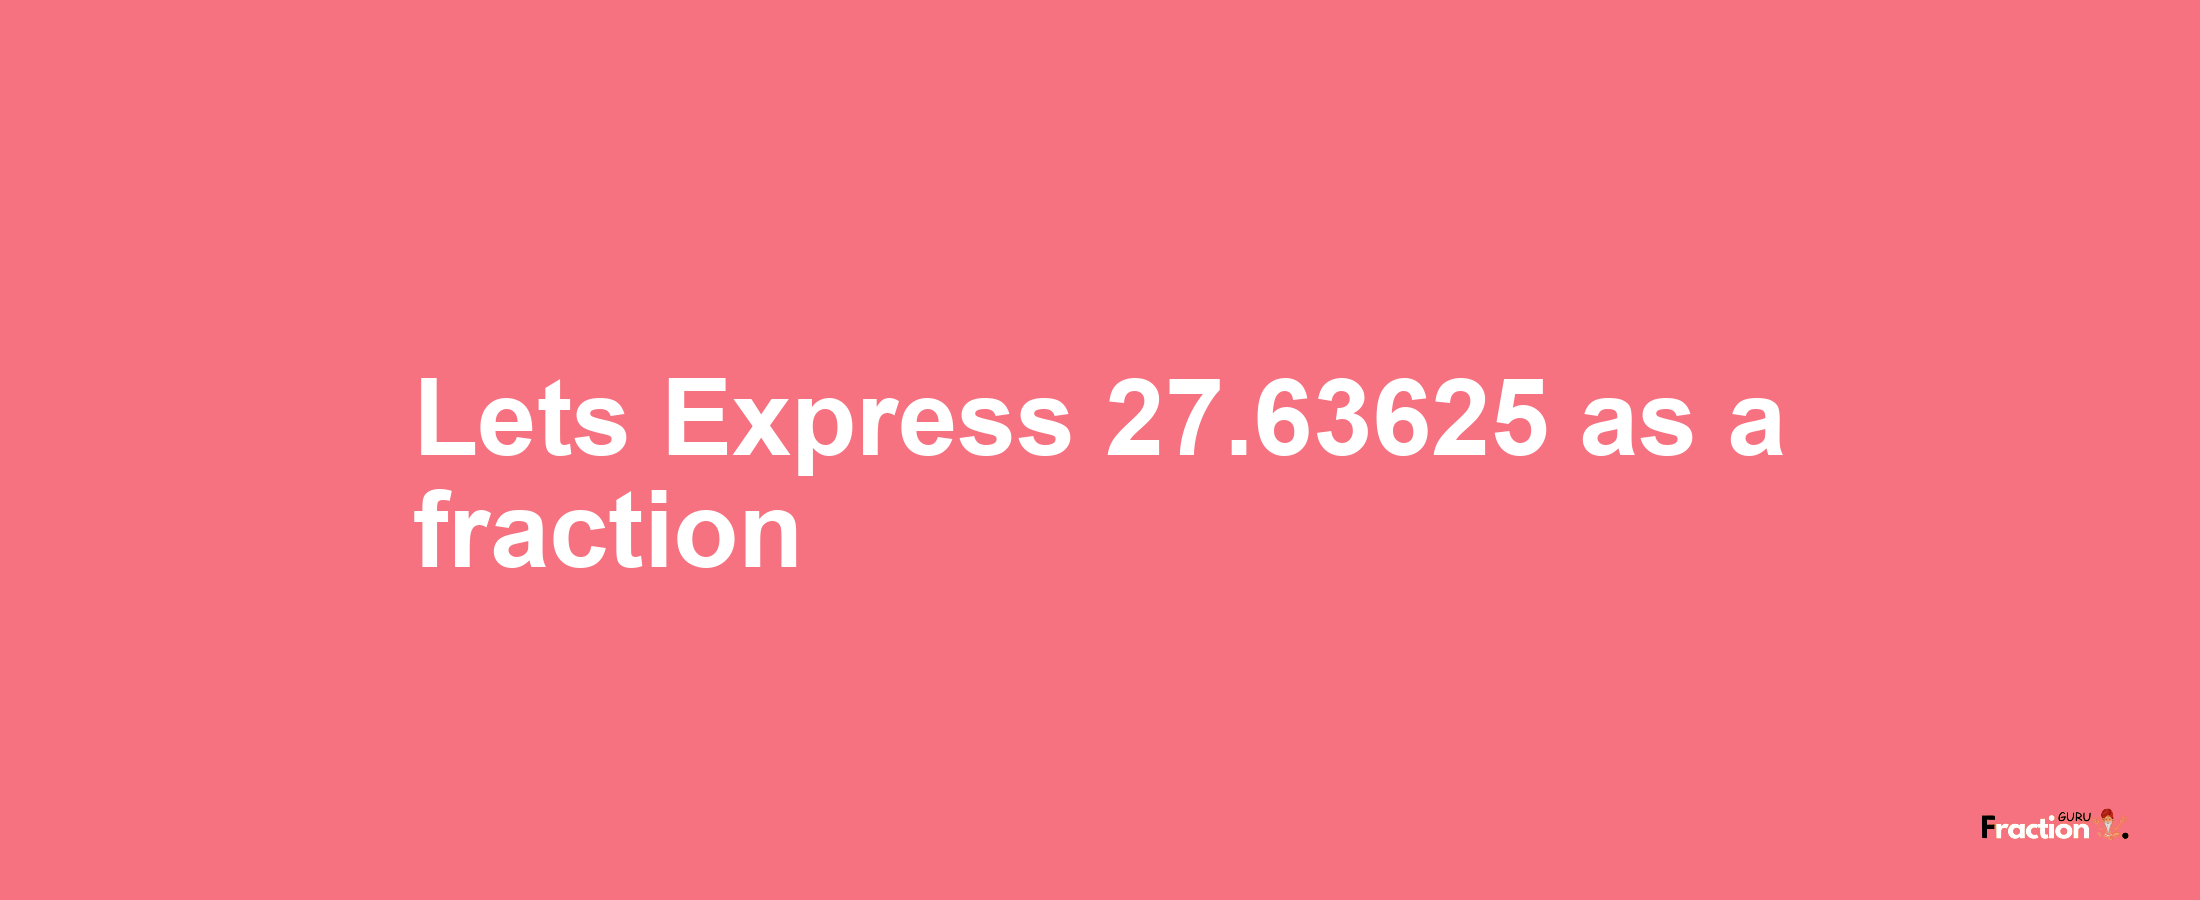 Lets Express 27.63625 as afraction